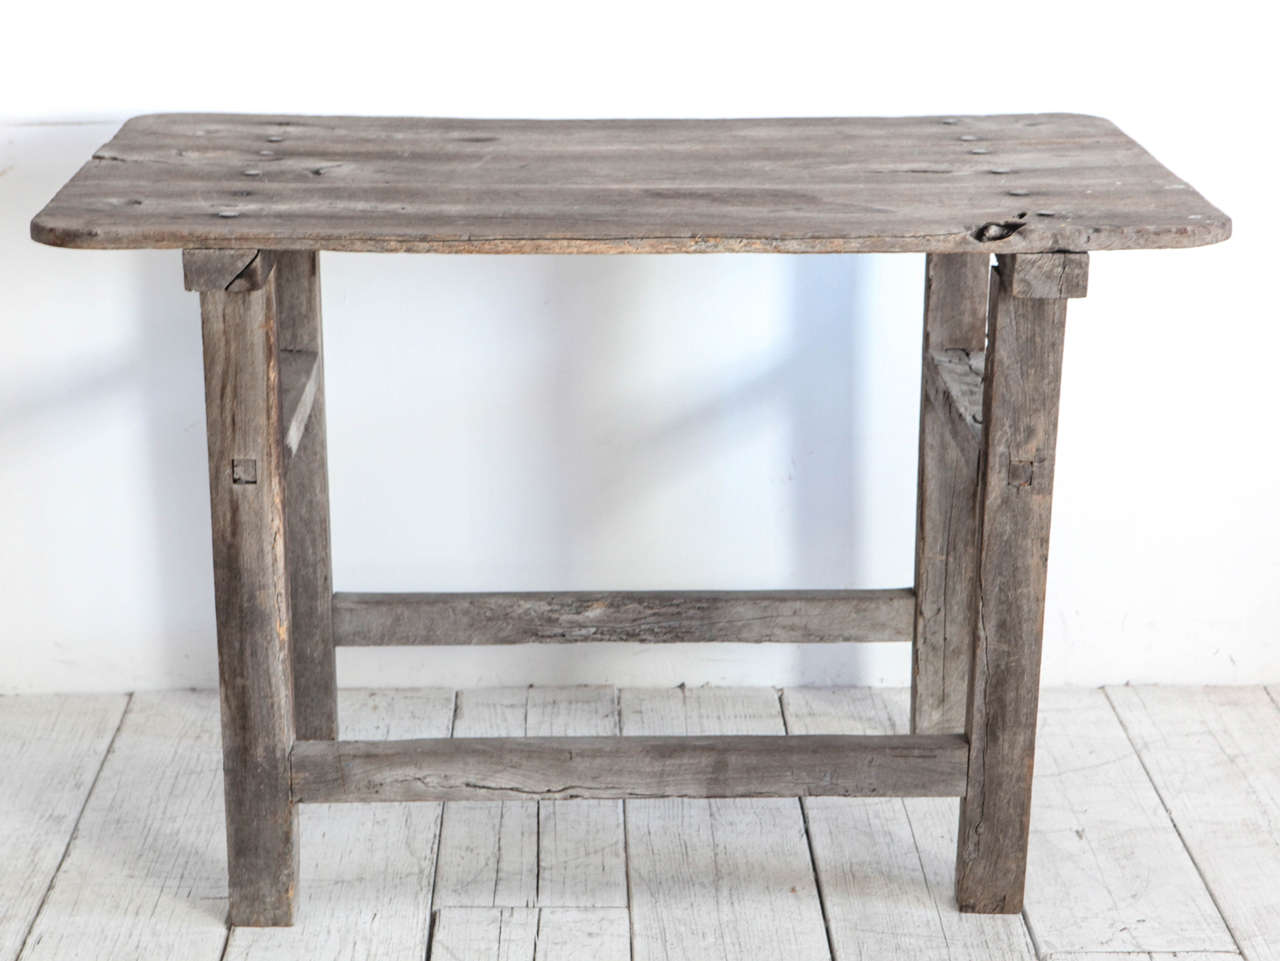 Vintage bar height table in distressed rustic grey patina. Top is detachable.